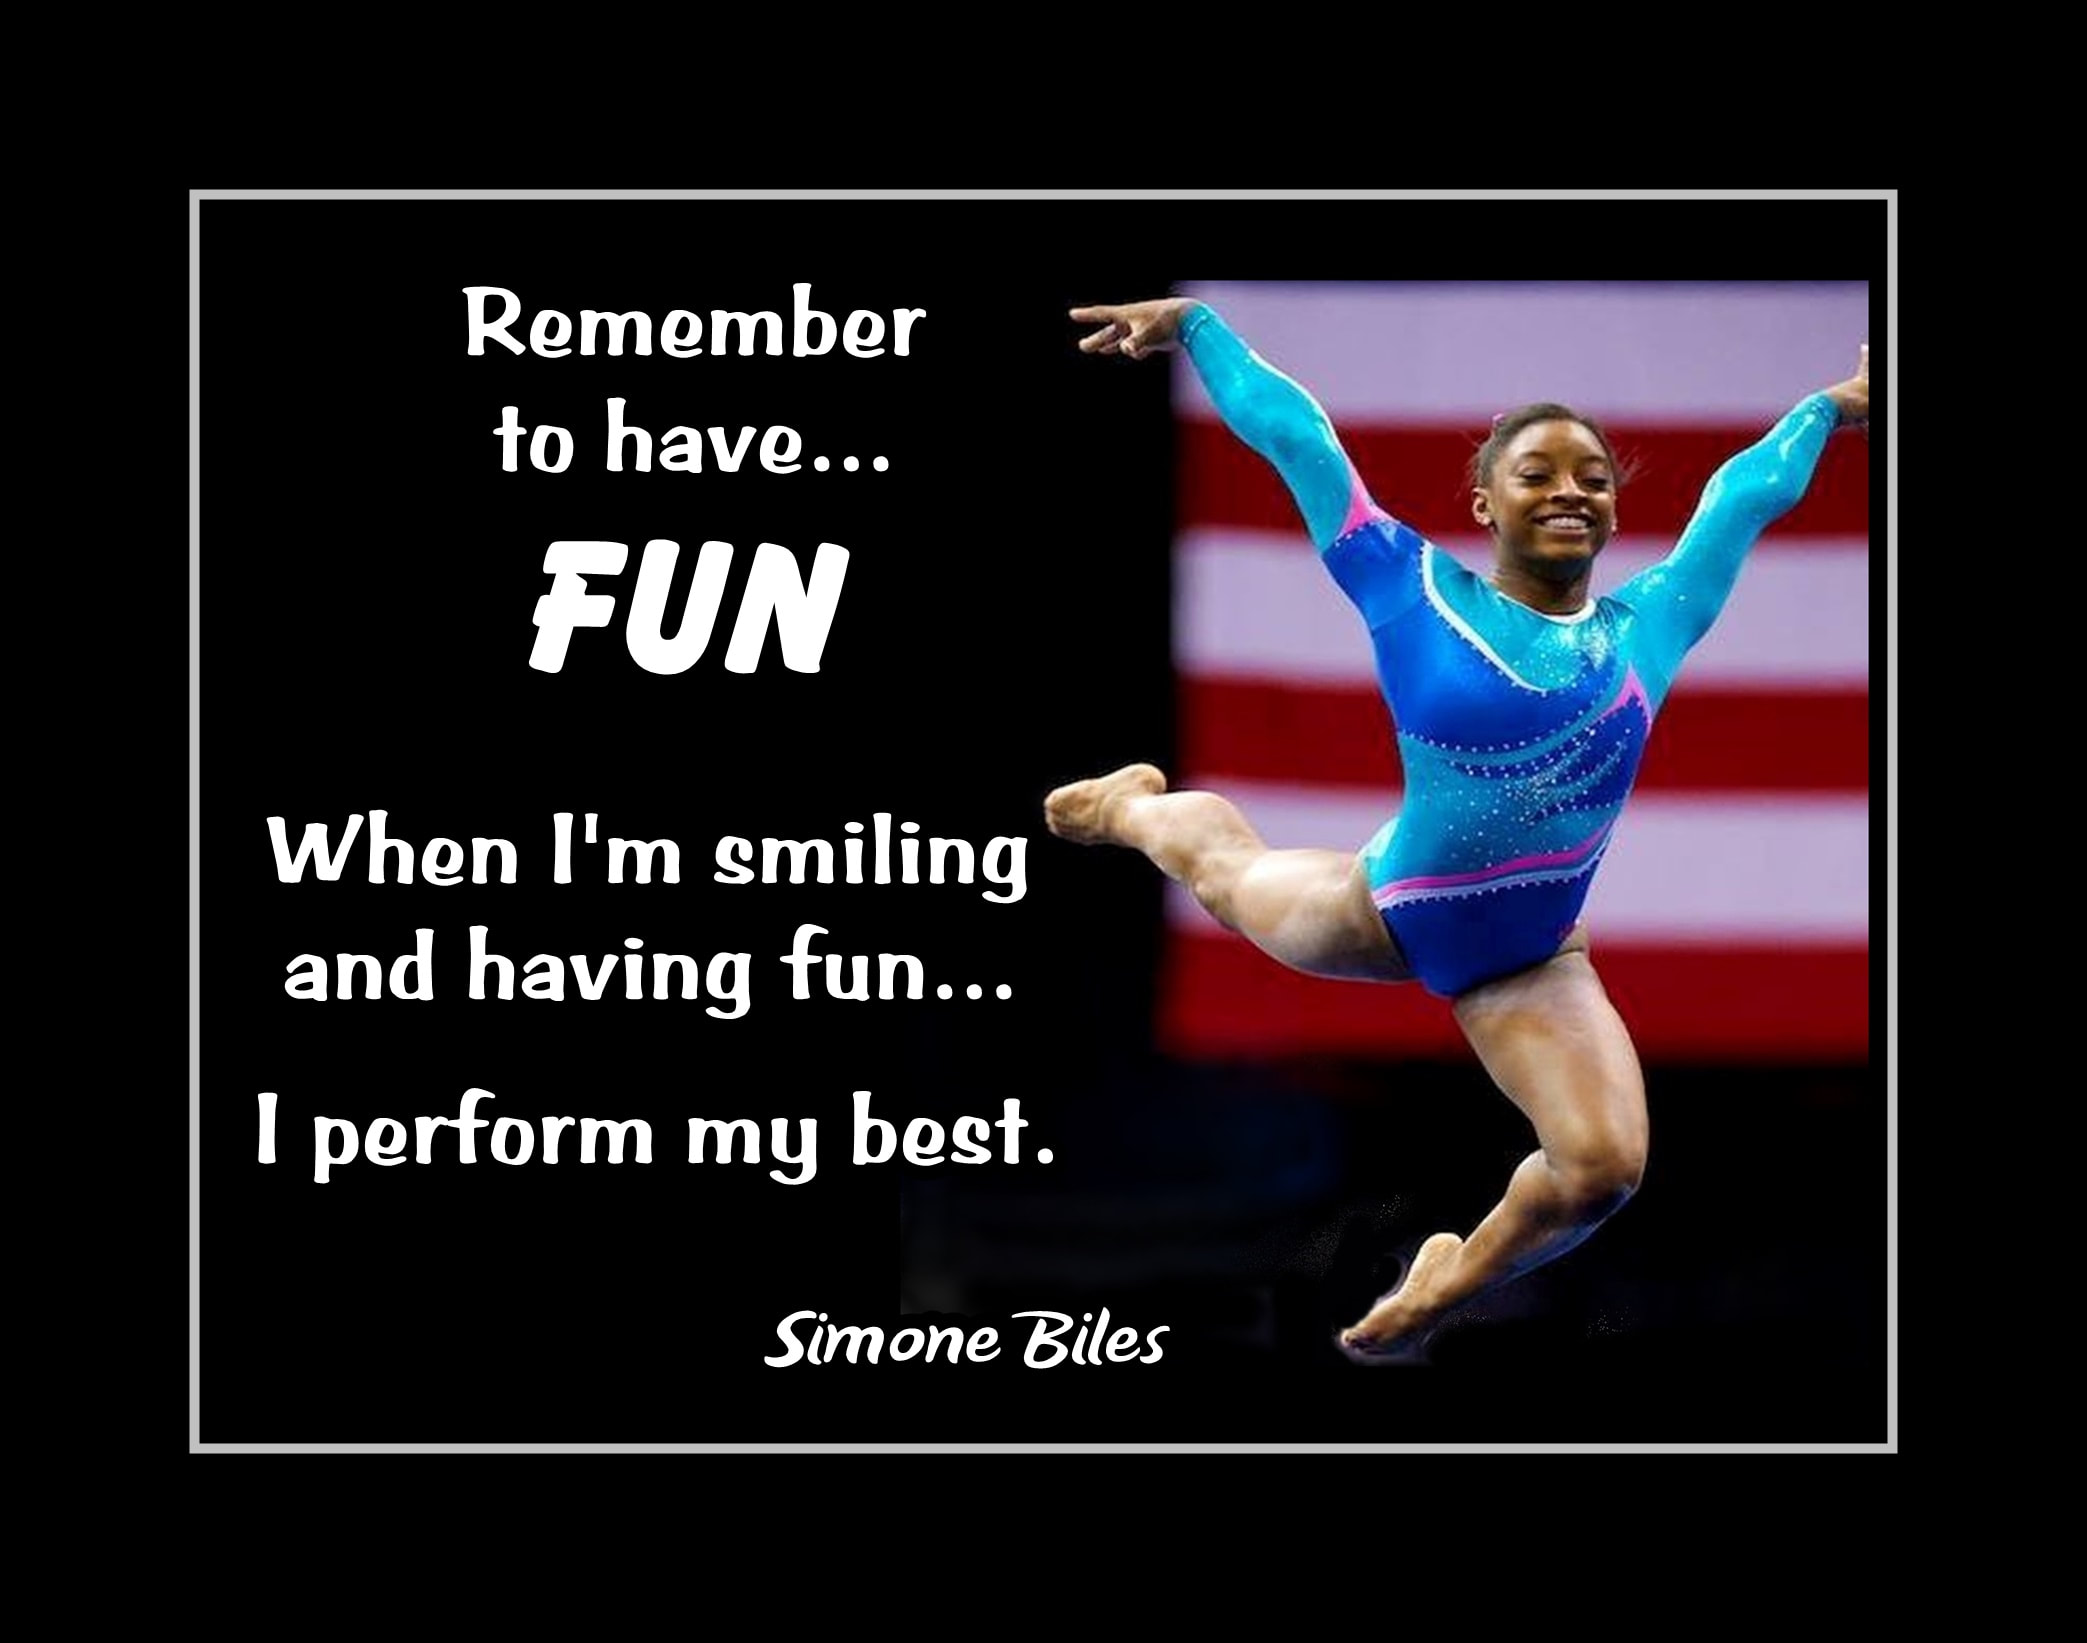 simone biles quotes about olympics